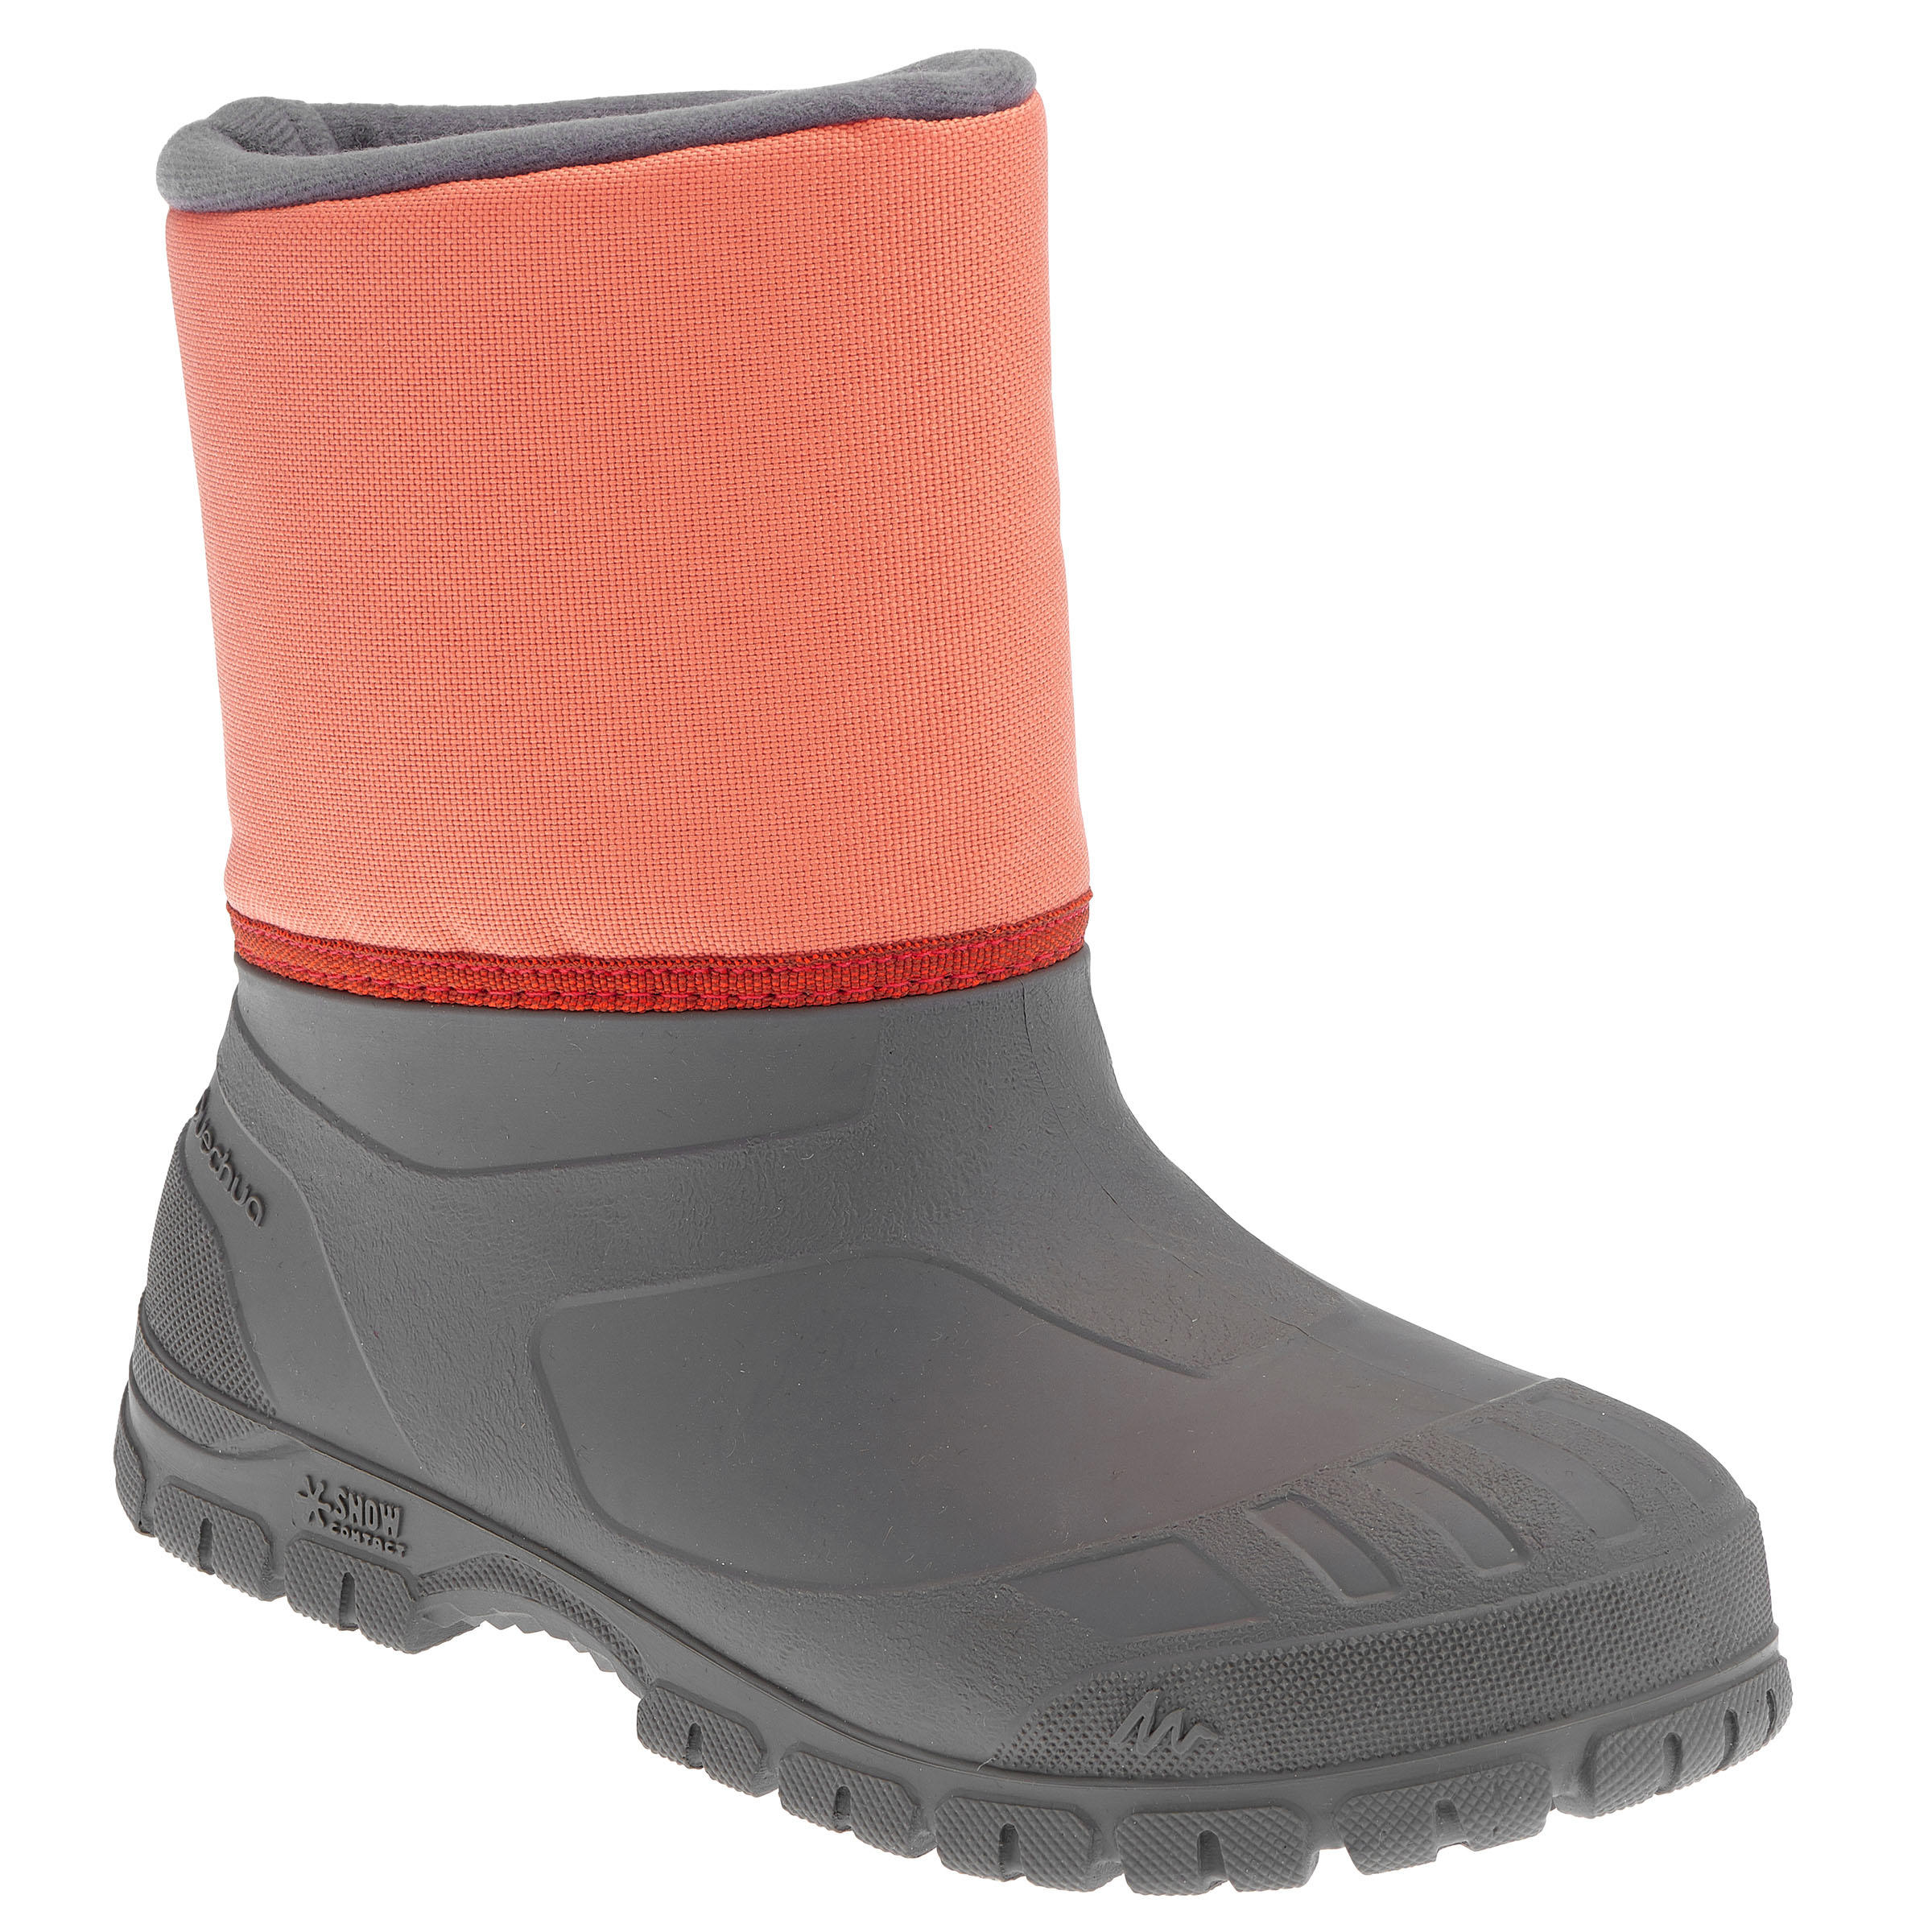 QUECHUA SH100 Children's Warm and Waterproof Snow Hiking Boots - Coral